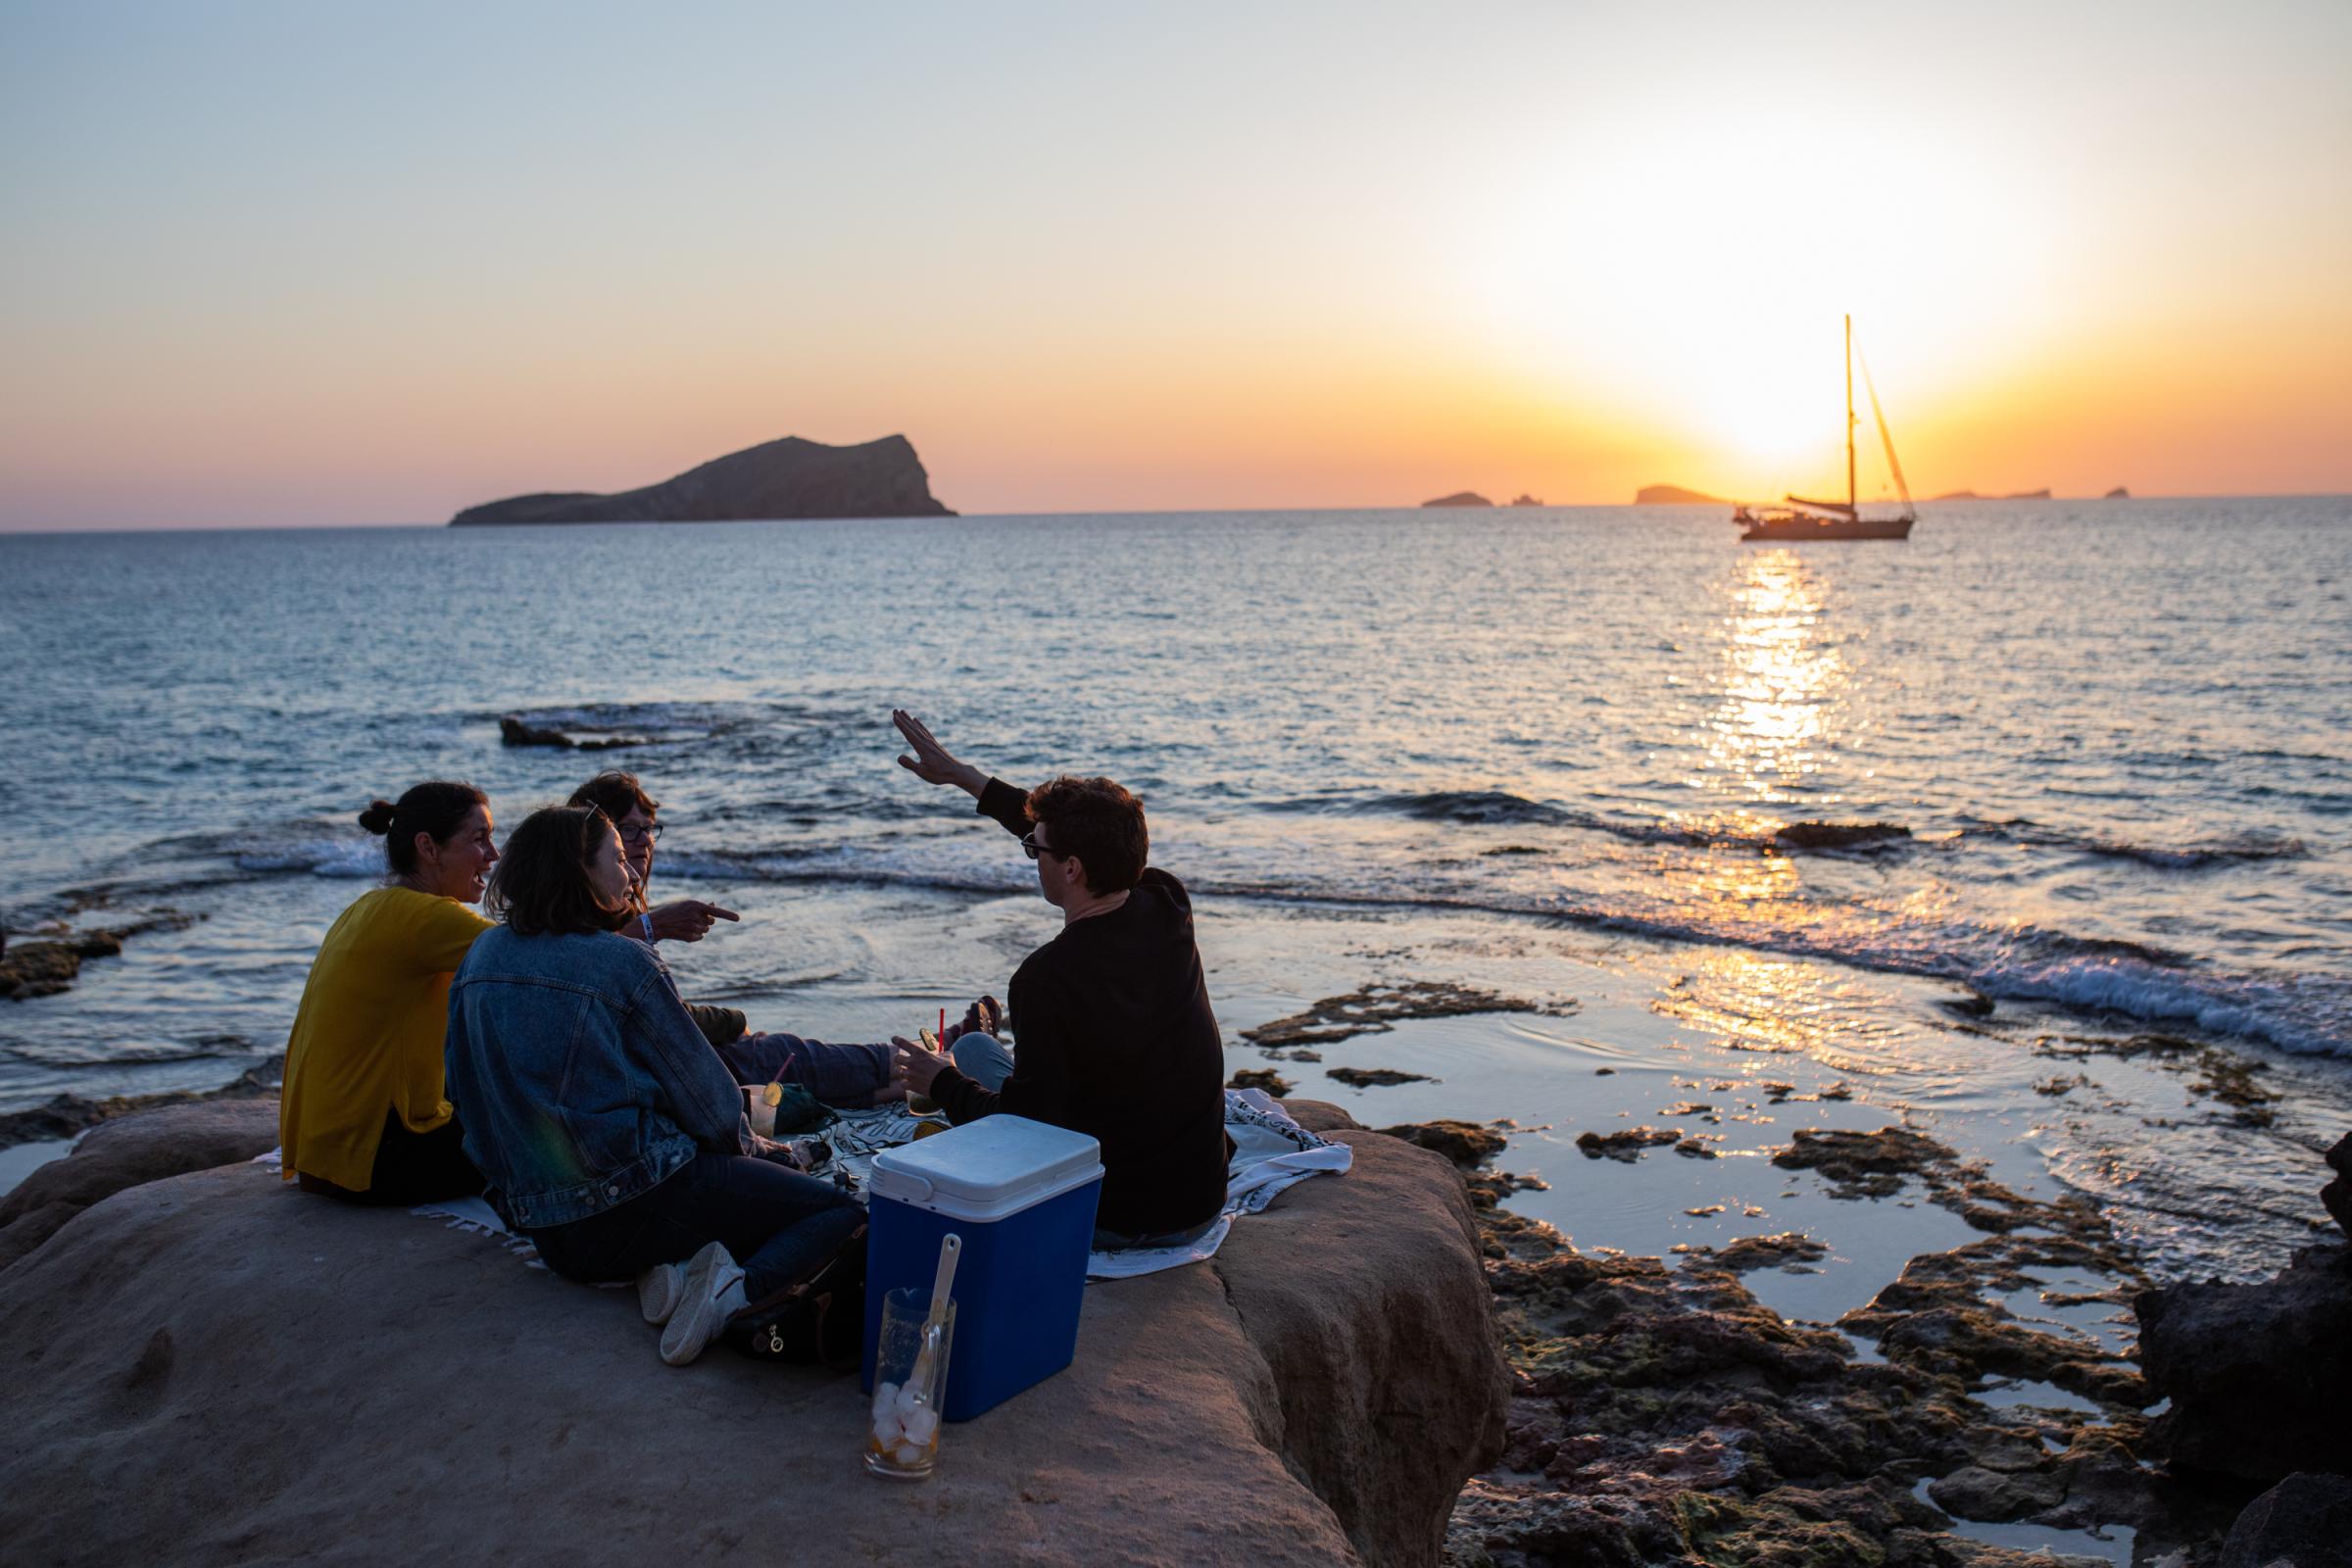 Grand Opening At Pacha Ibiza Heralds A Pre-Pandemic Party Season - Tourists enjoy the sunset at Escondida beach on April 29,...